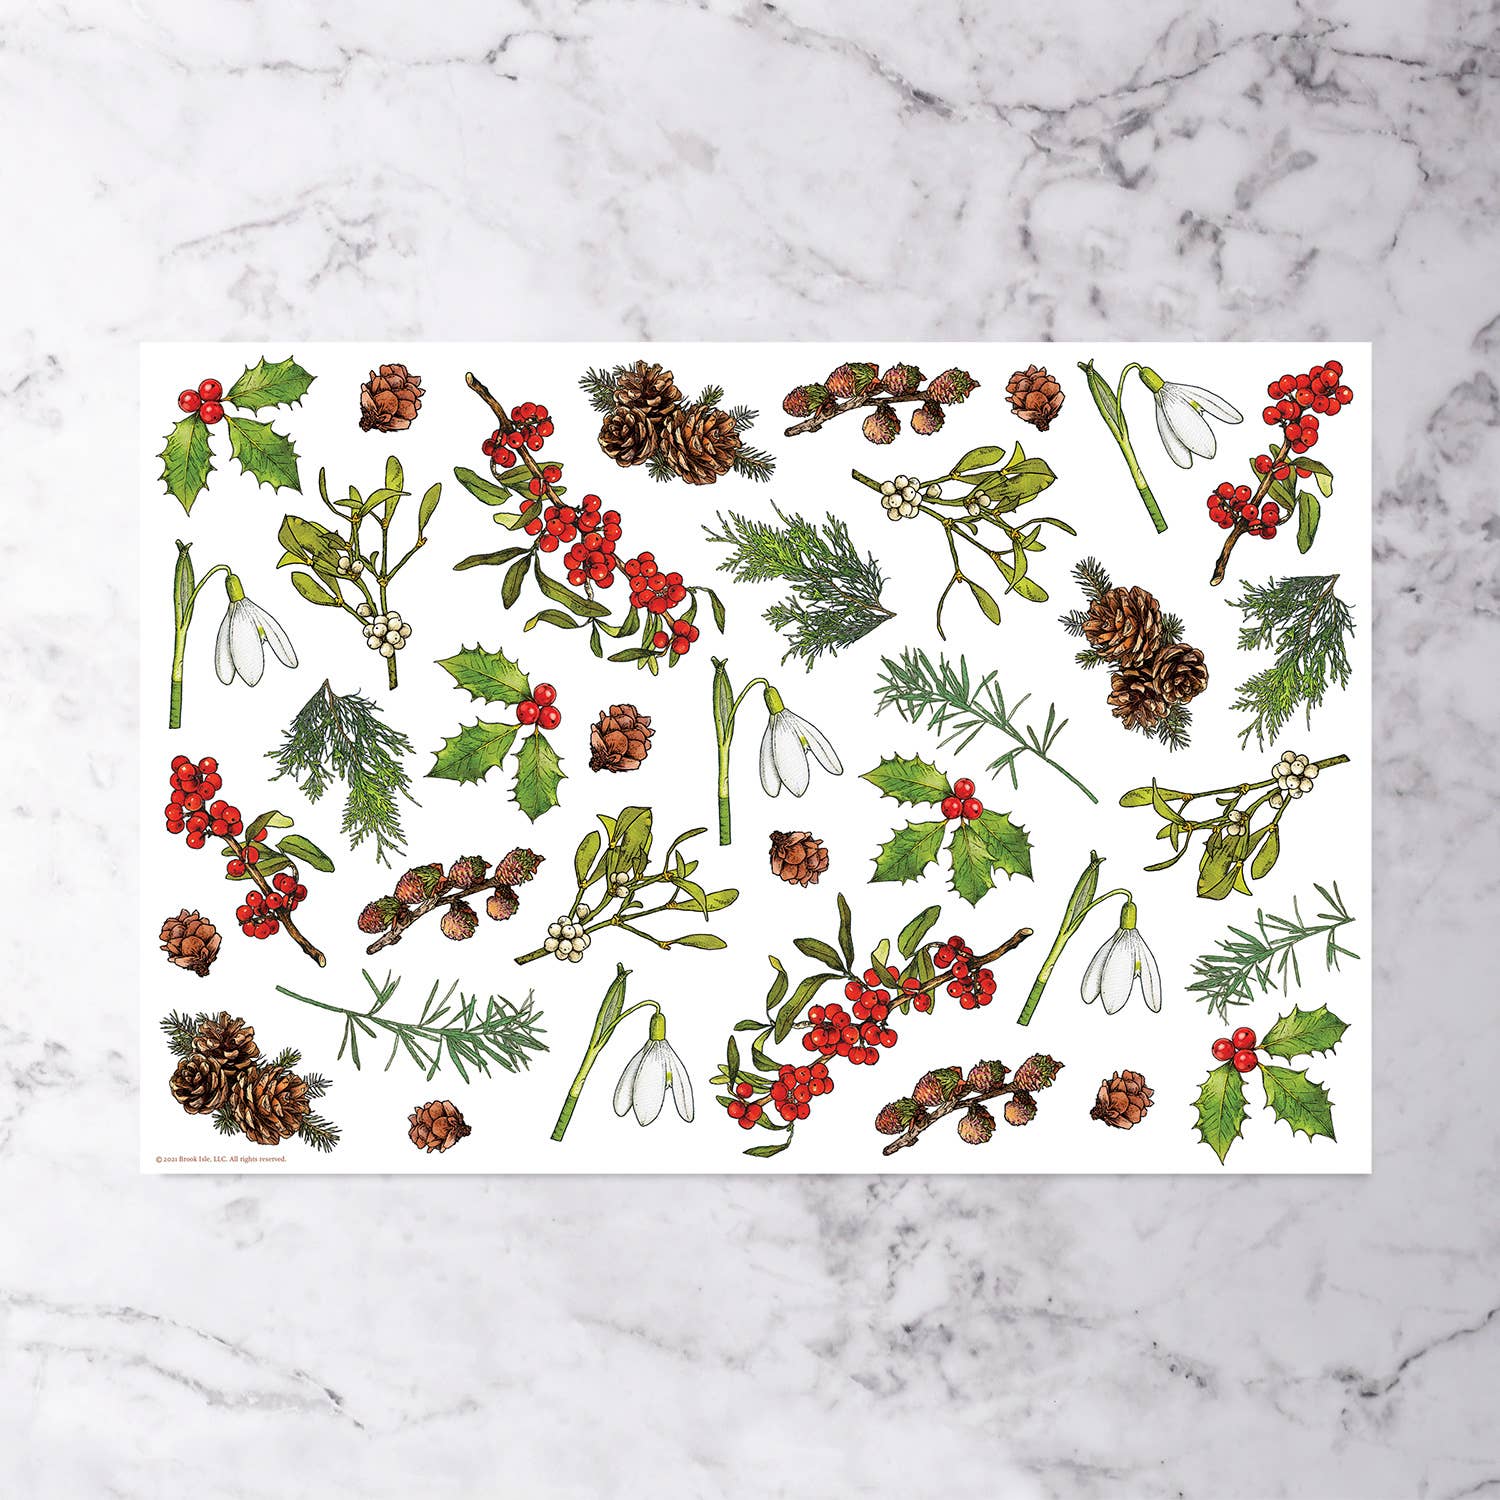 Paper Placemats (Set of 12) - Fenwick & OliverPaper Placemats (Set of 12)PaperBrook IsleFenwick & OliverMAT-Fern-5